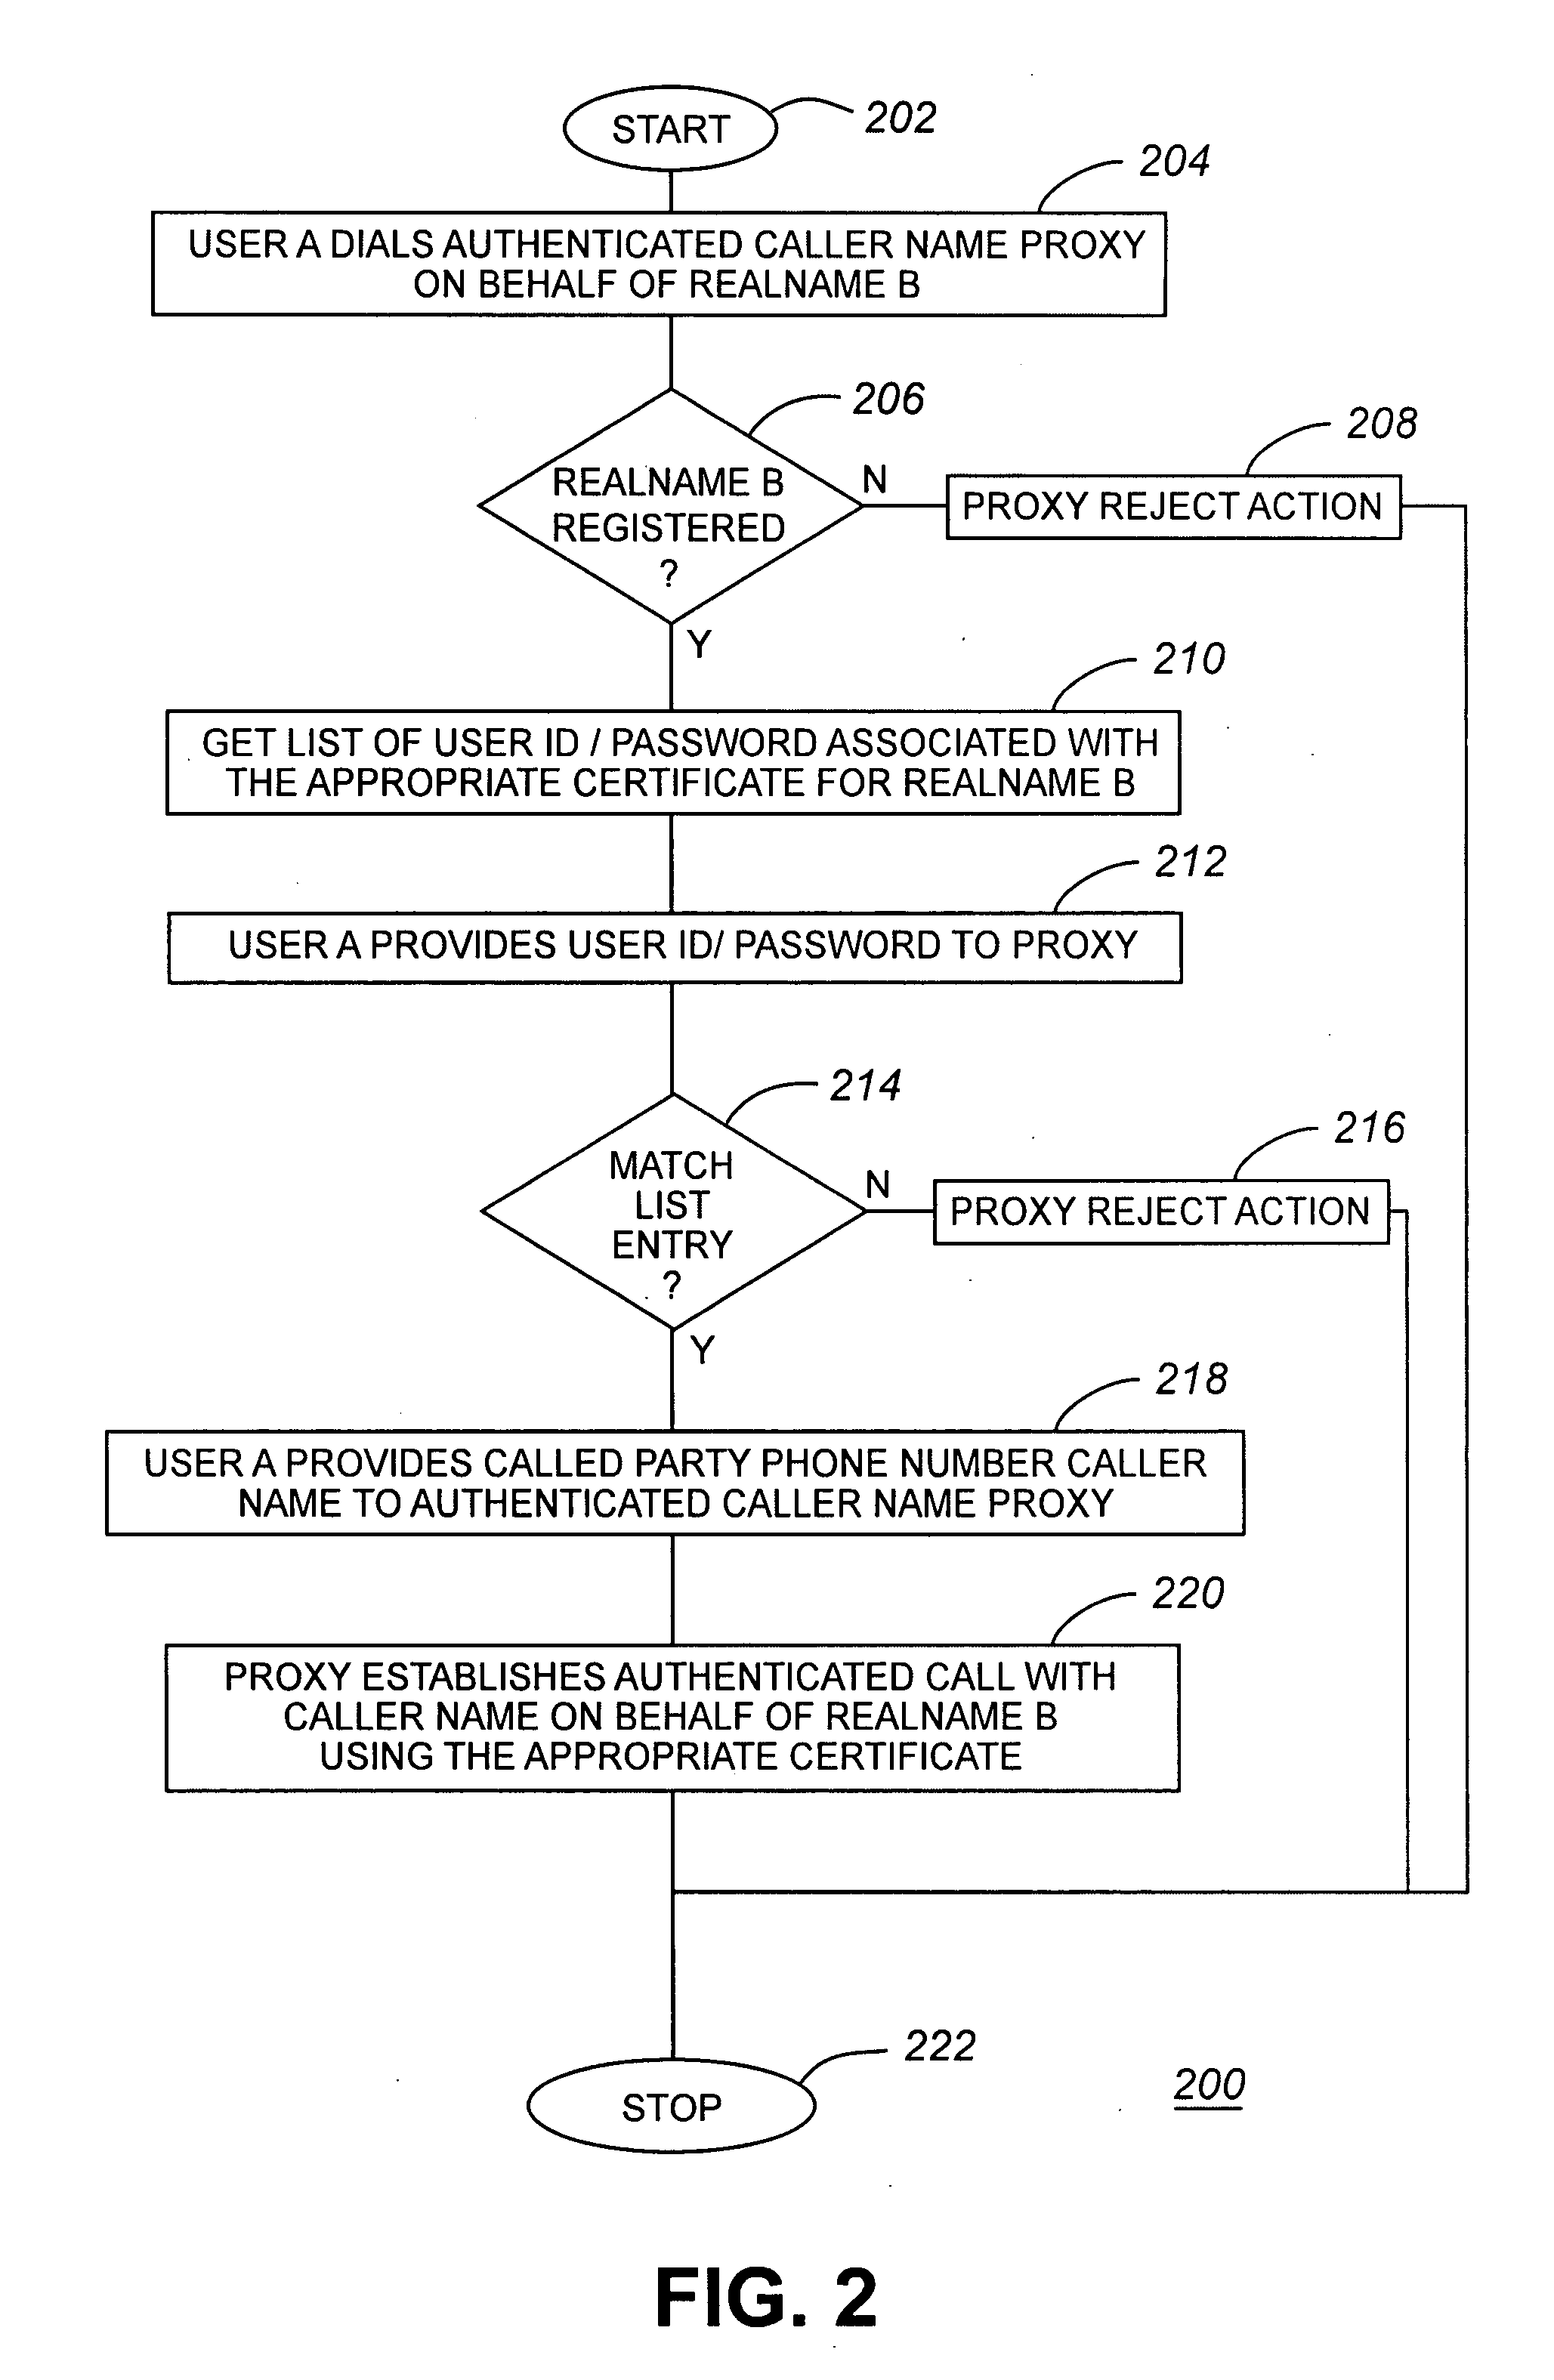 Proxy for authenticated caller name